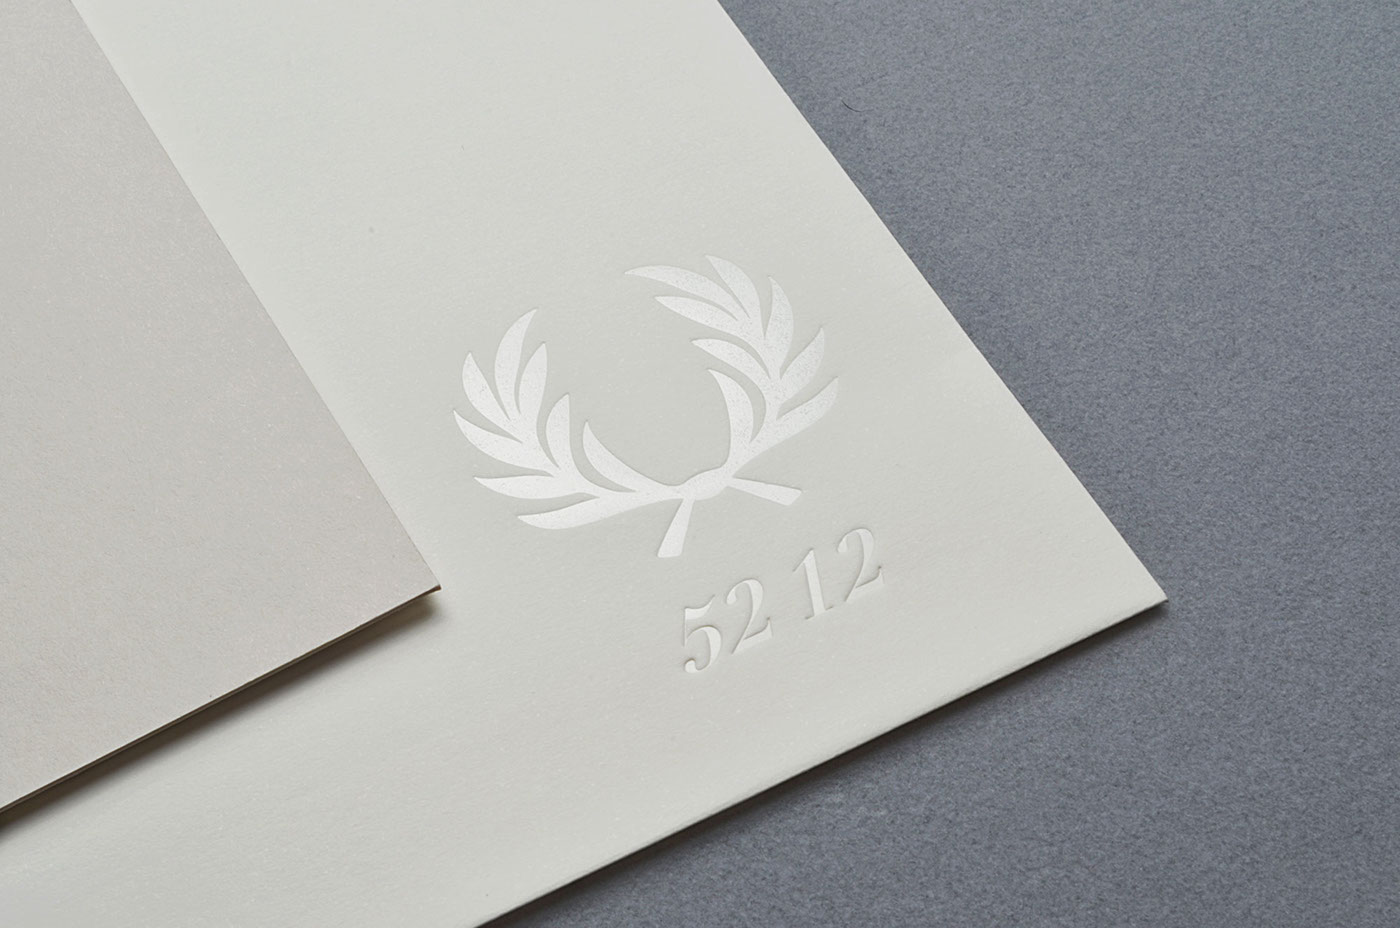 fred perry The Bakery Moscow Invitation Foil Blocking